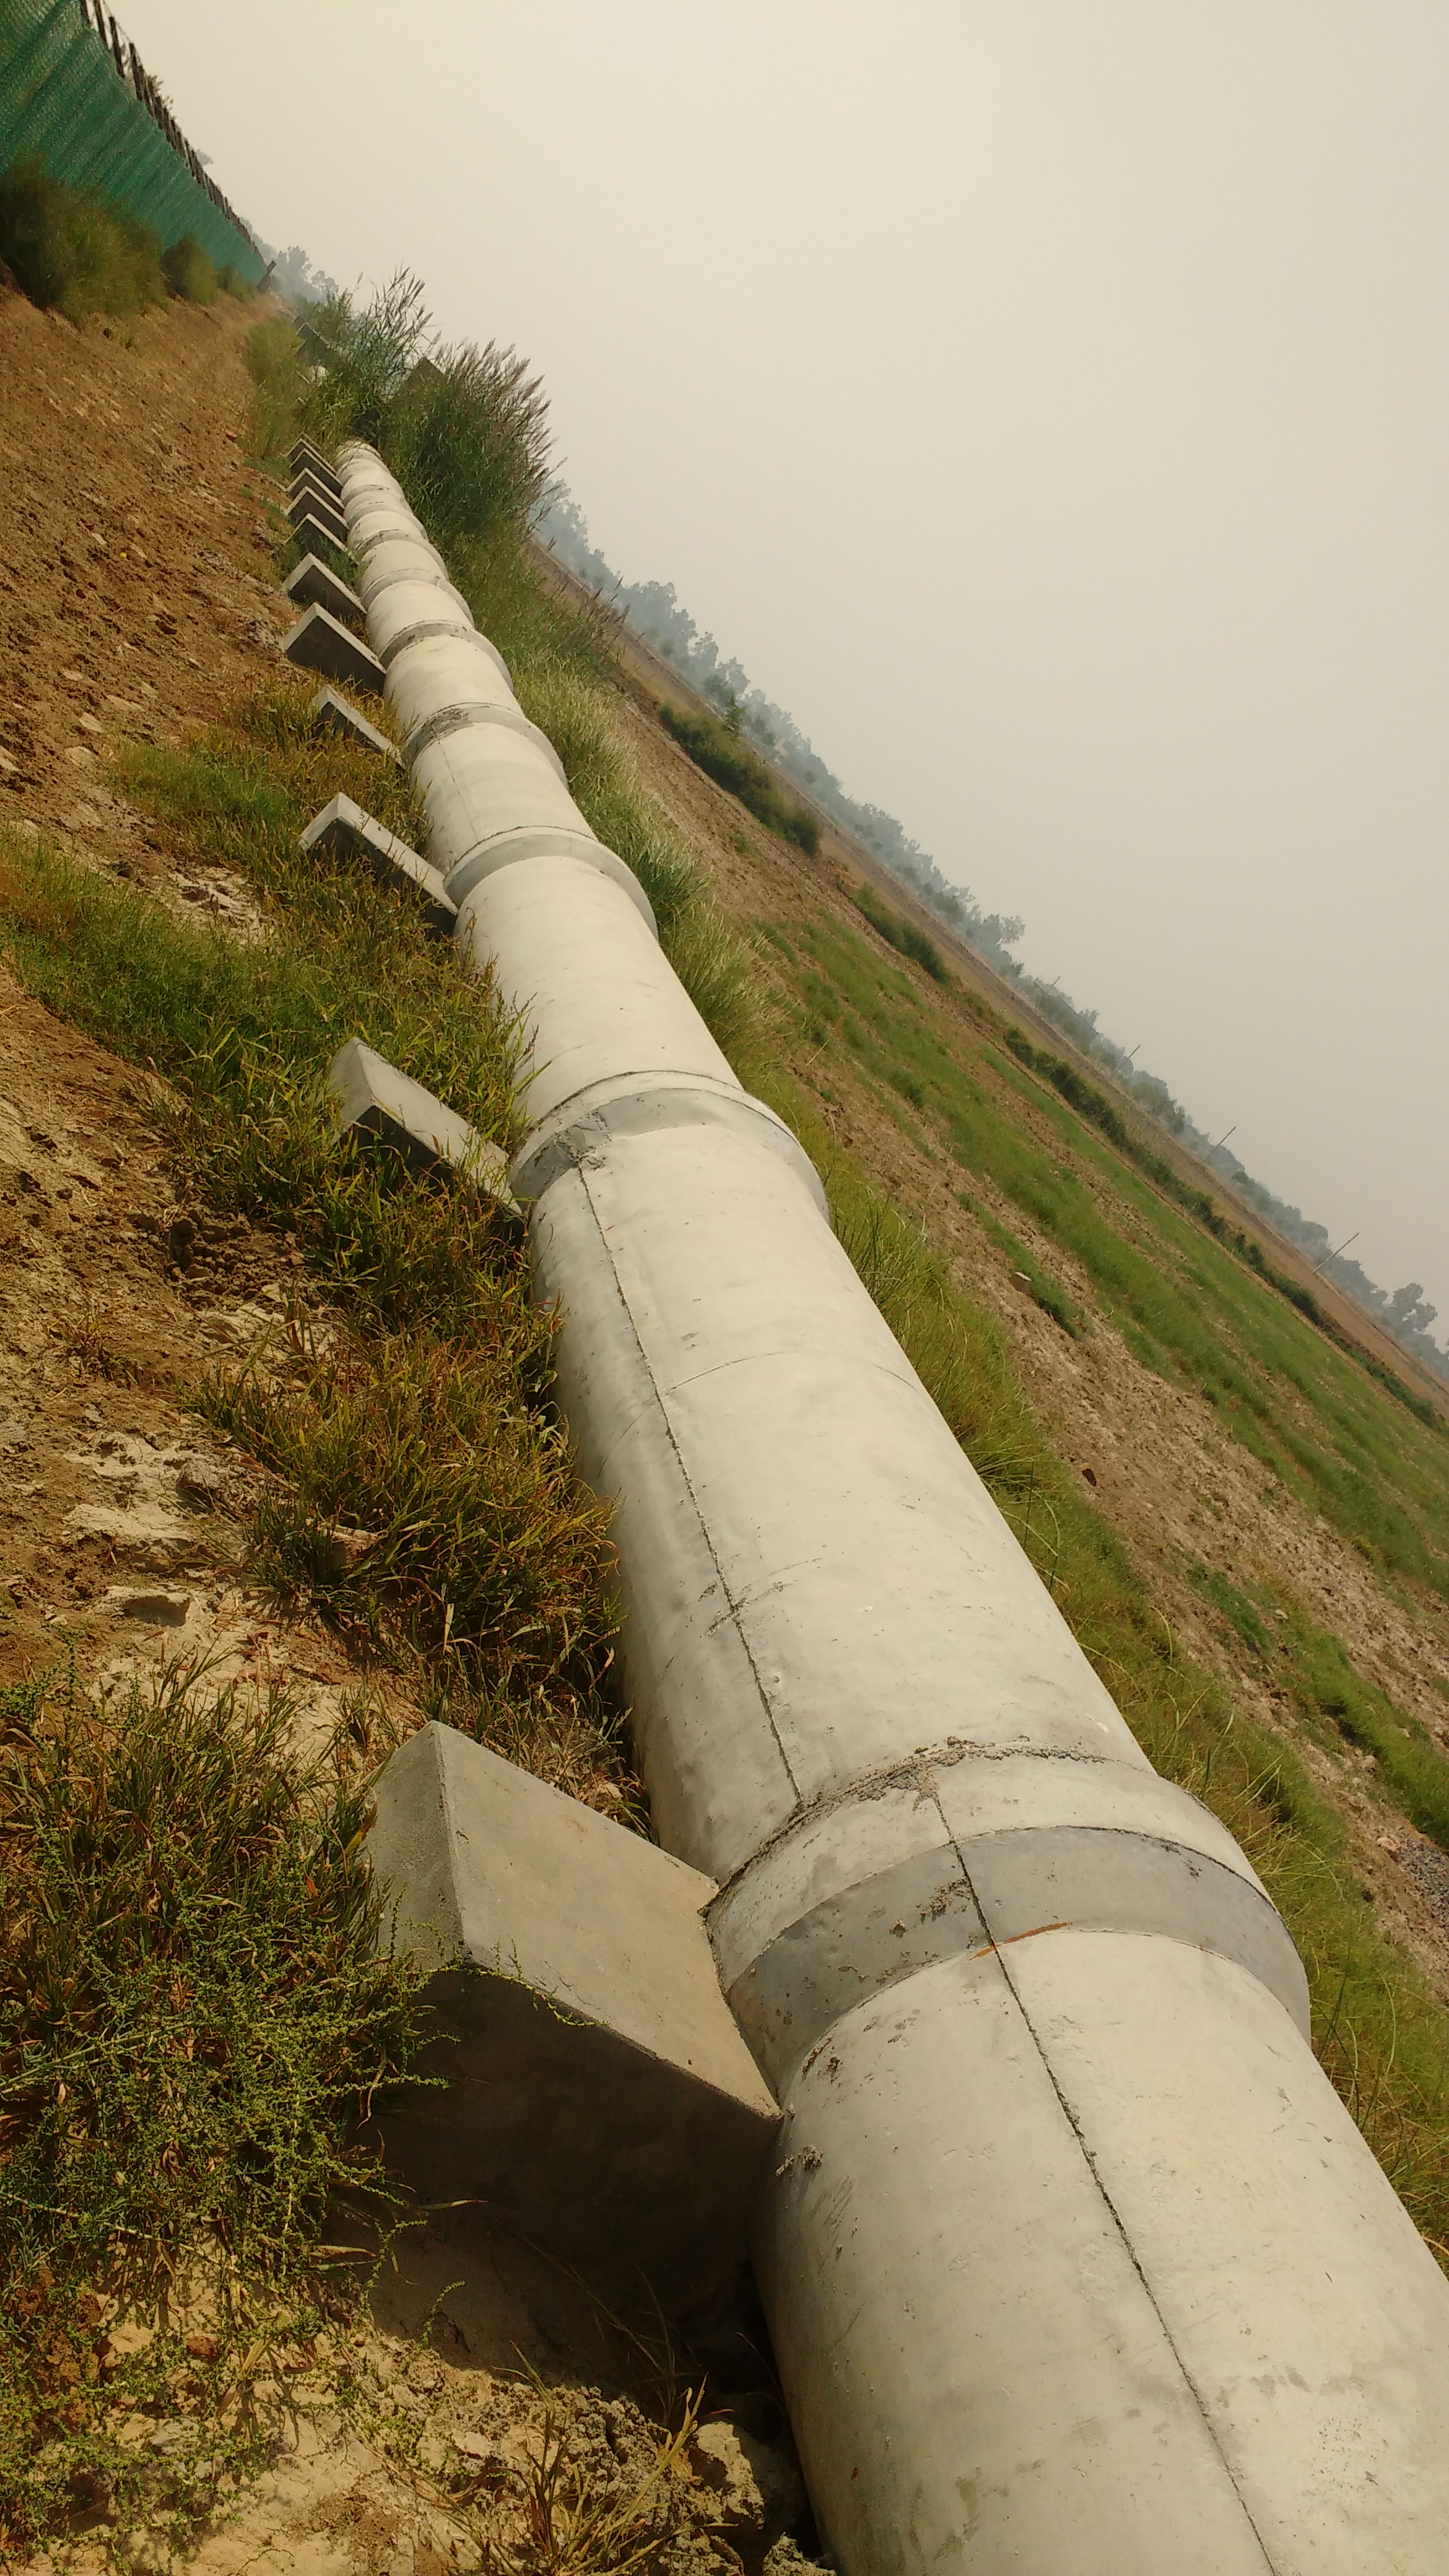 Rs 70 lakh spent but pipeline fails to supply water to wheat research institute farm in Hisar